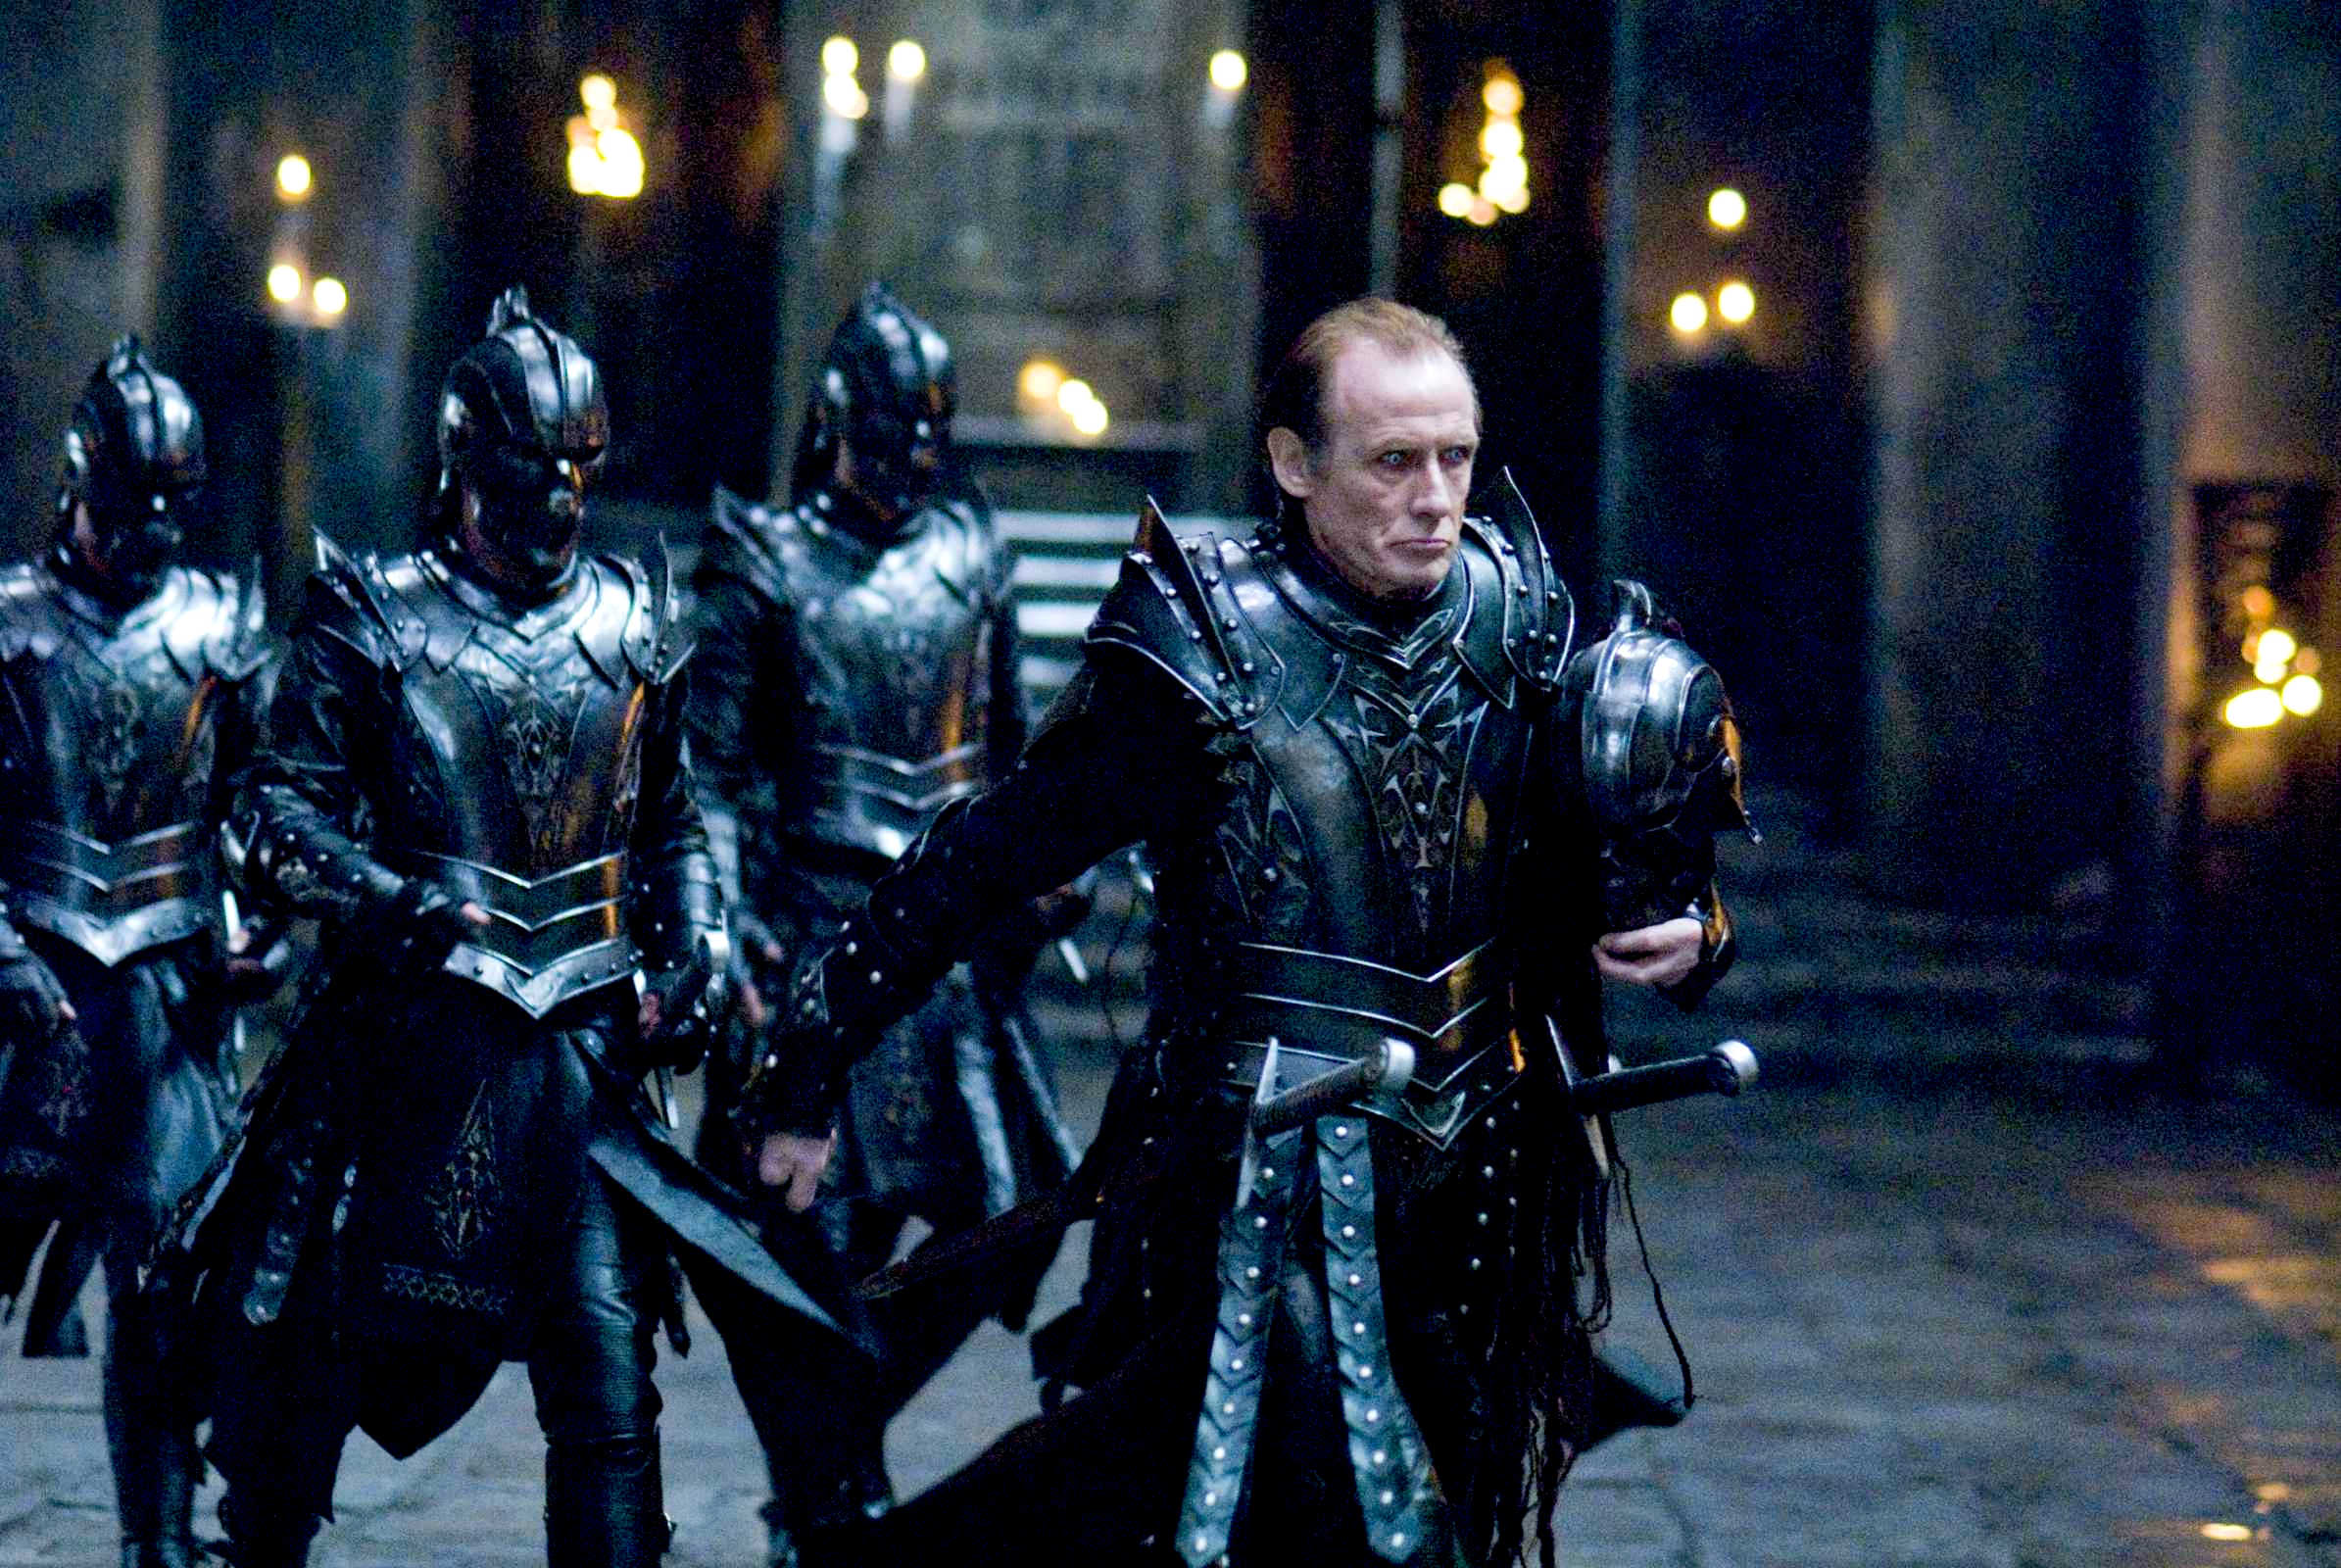 Bill Nighy stars as Viktor in Screen Gems' Underworld: Rise of the Lycans (2009). Photo credit by Ken George.